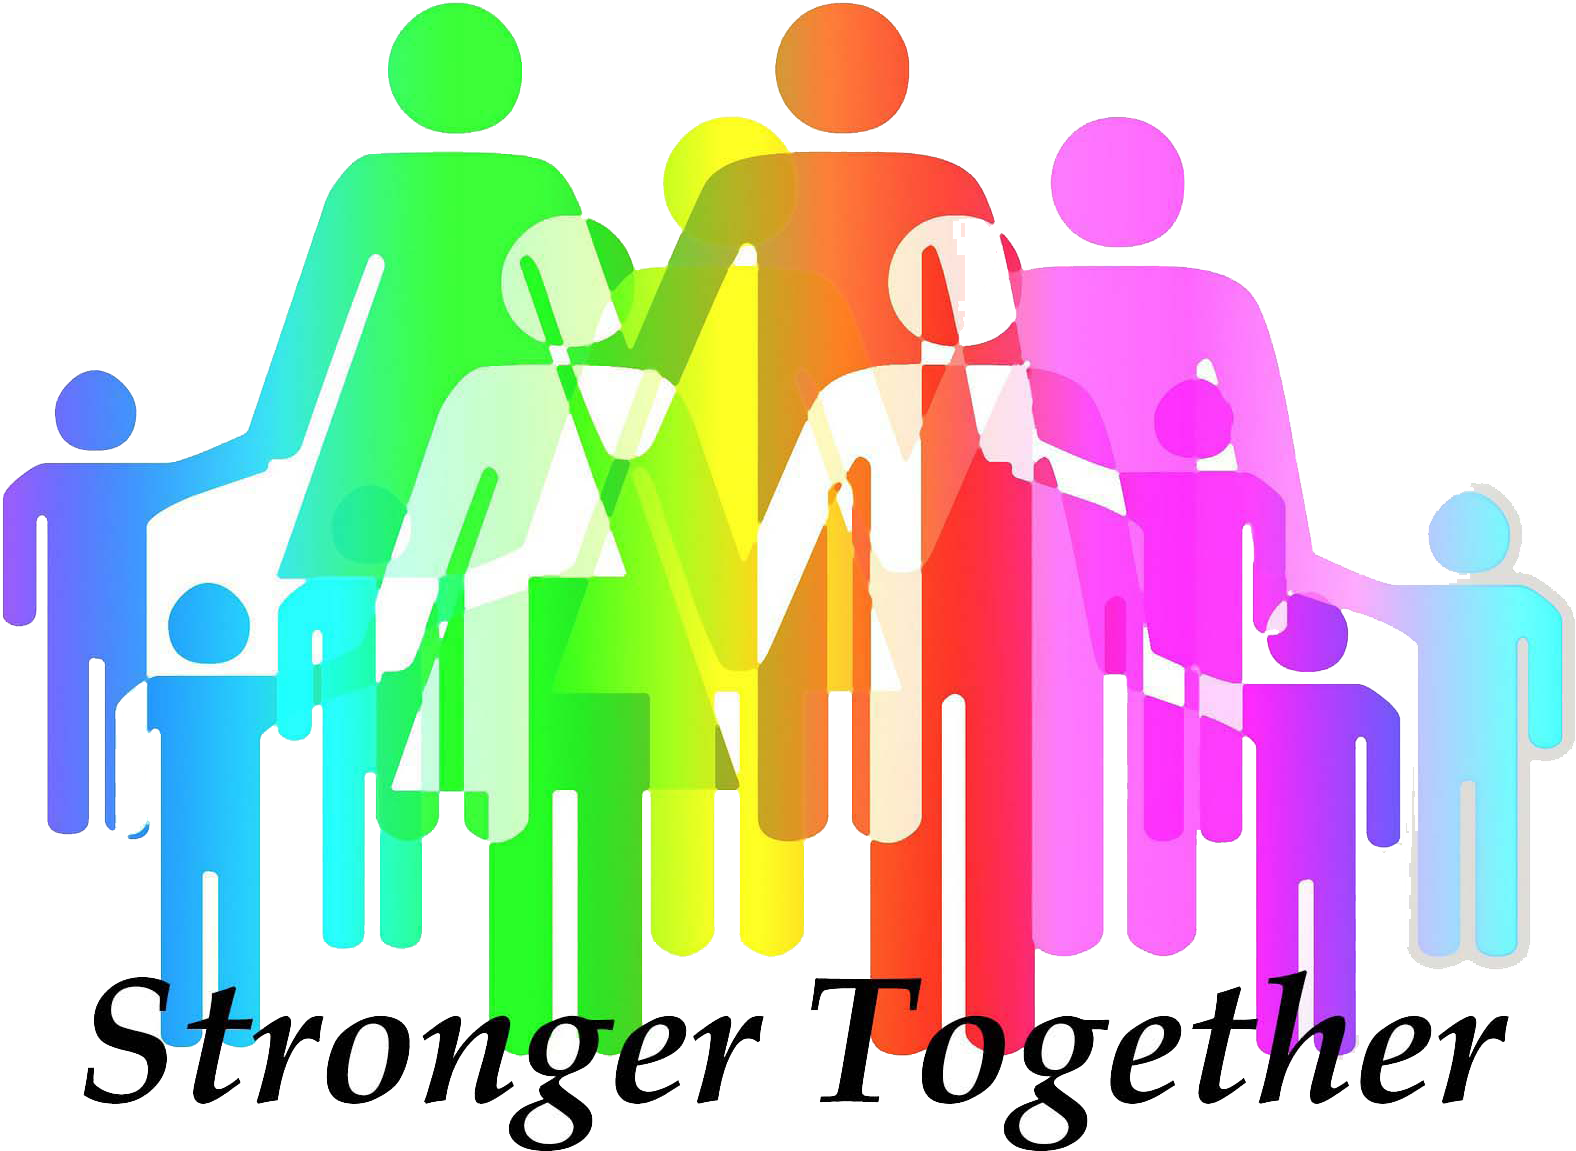 "Stronger Together" multicolored people icons holding hands and overlapping